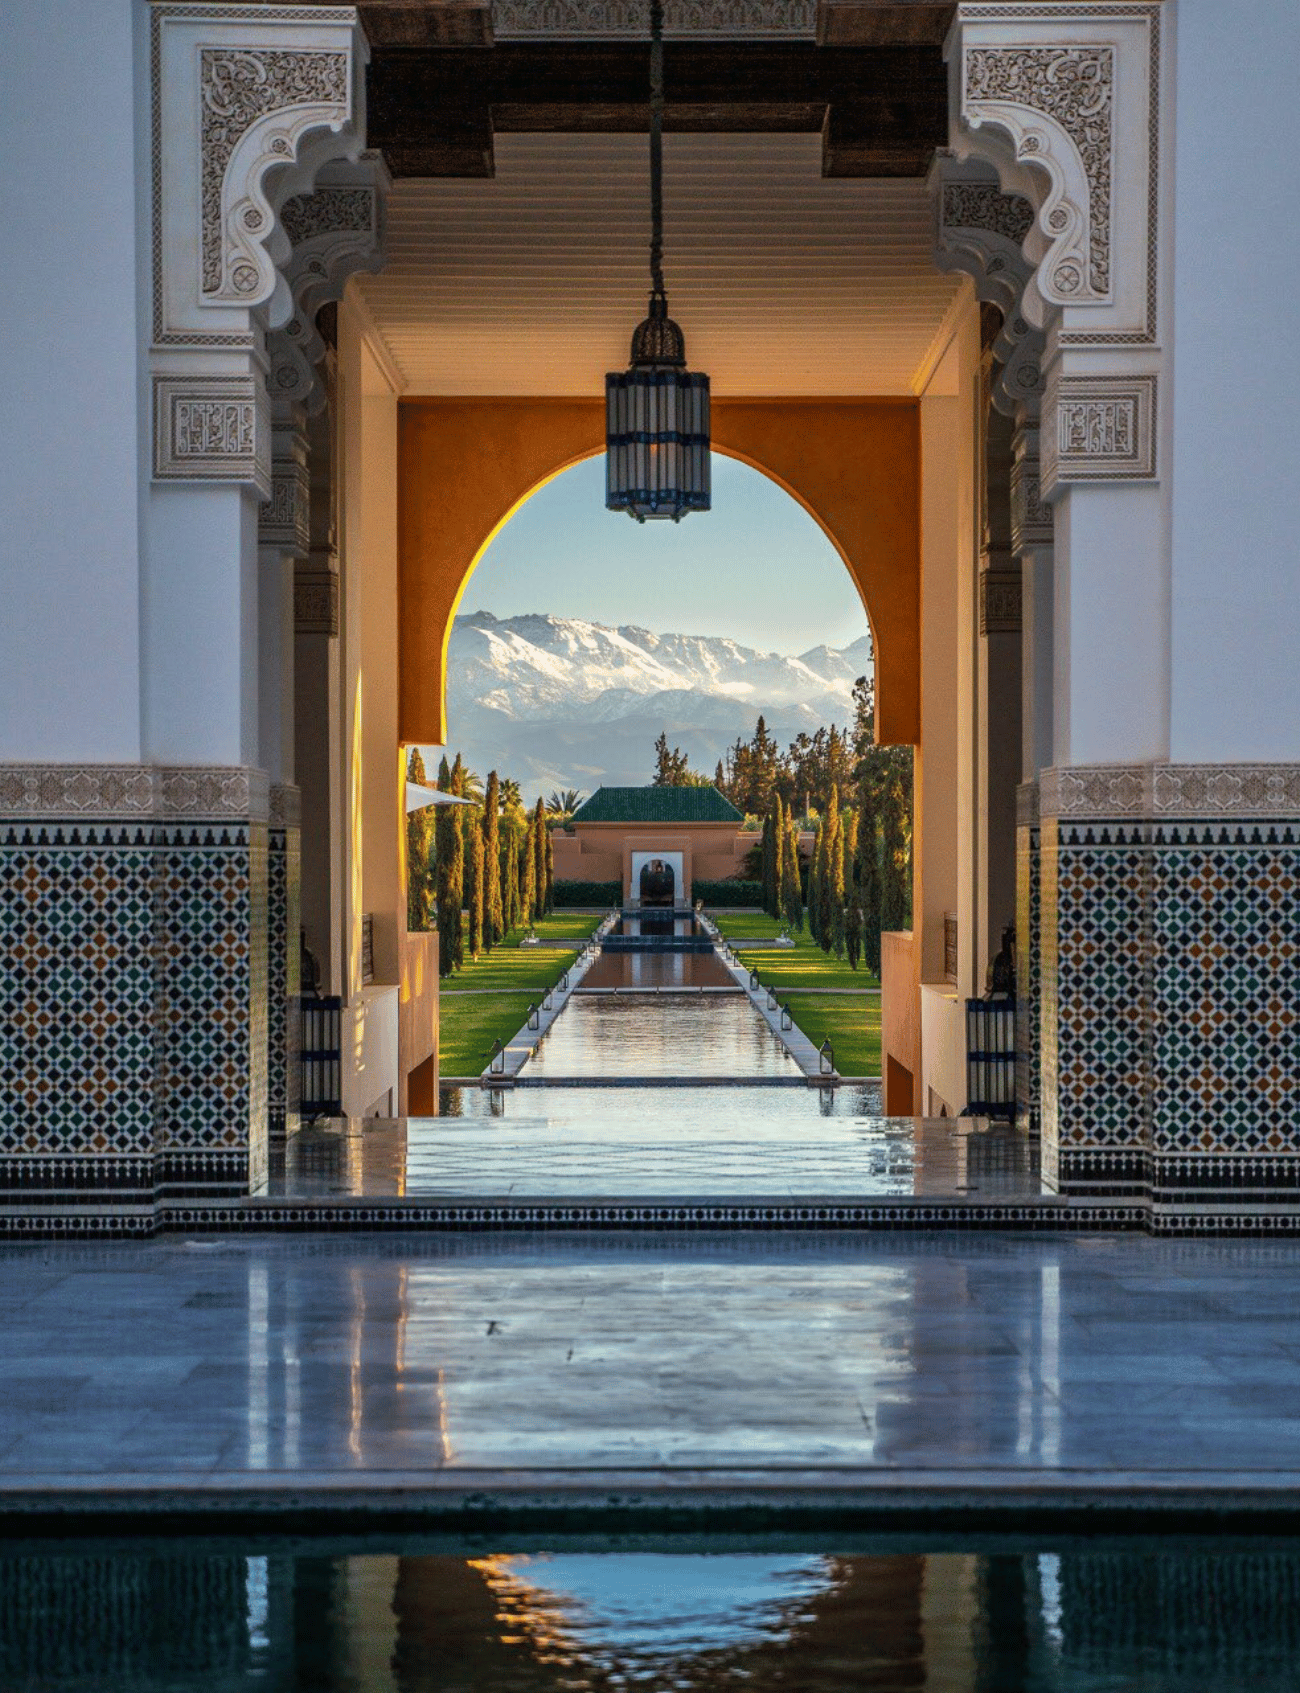 Snow-capped Atlas Mountains seen through a beautifully decorated Moroccan riad with a reflective pool in the foreground